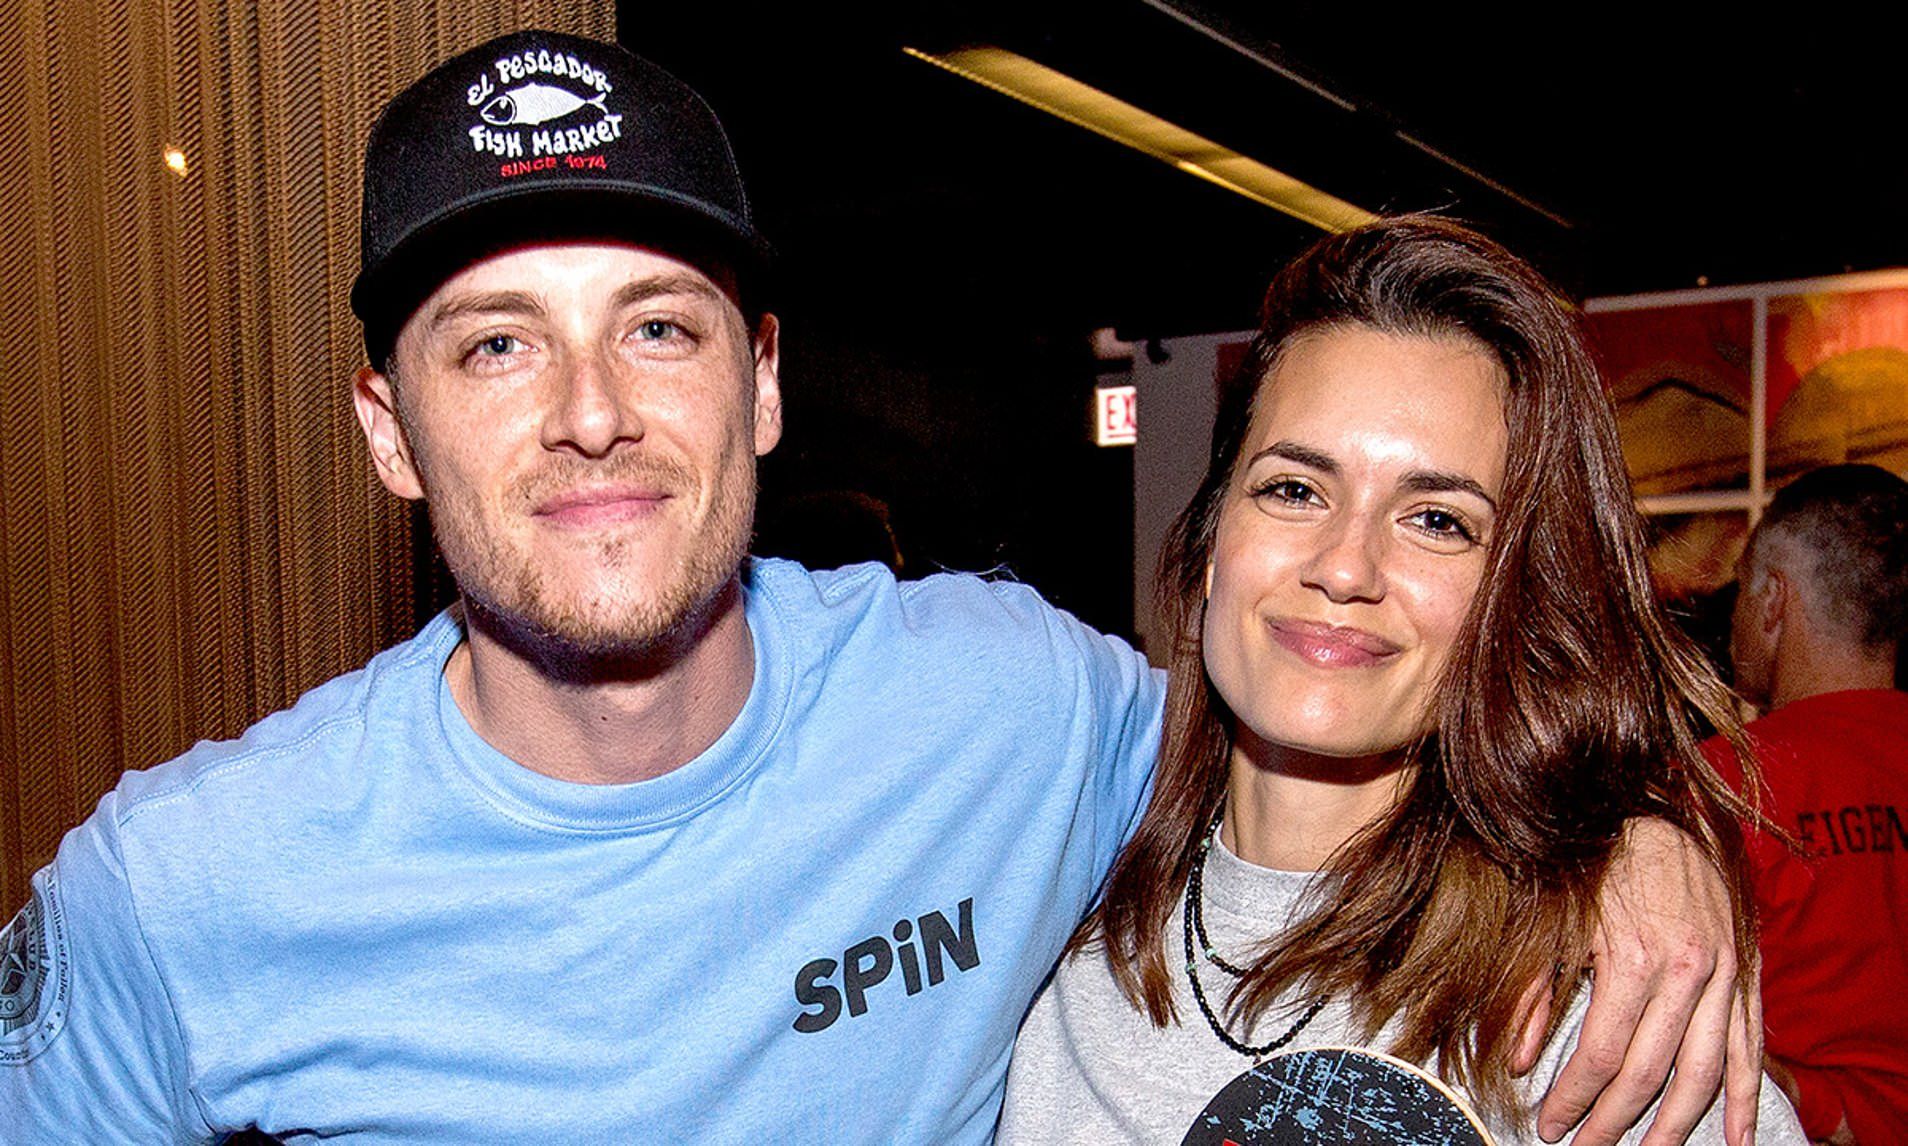 Chicago Med stars Torrey DeVitto and Jesse Lee Soffer call it quits after n...